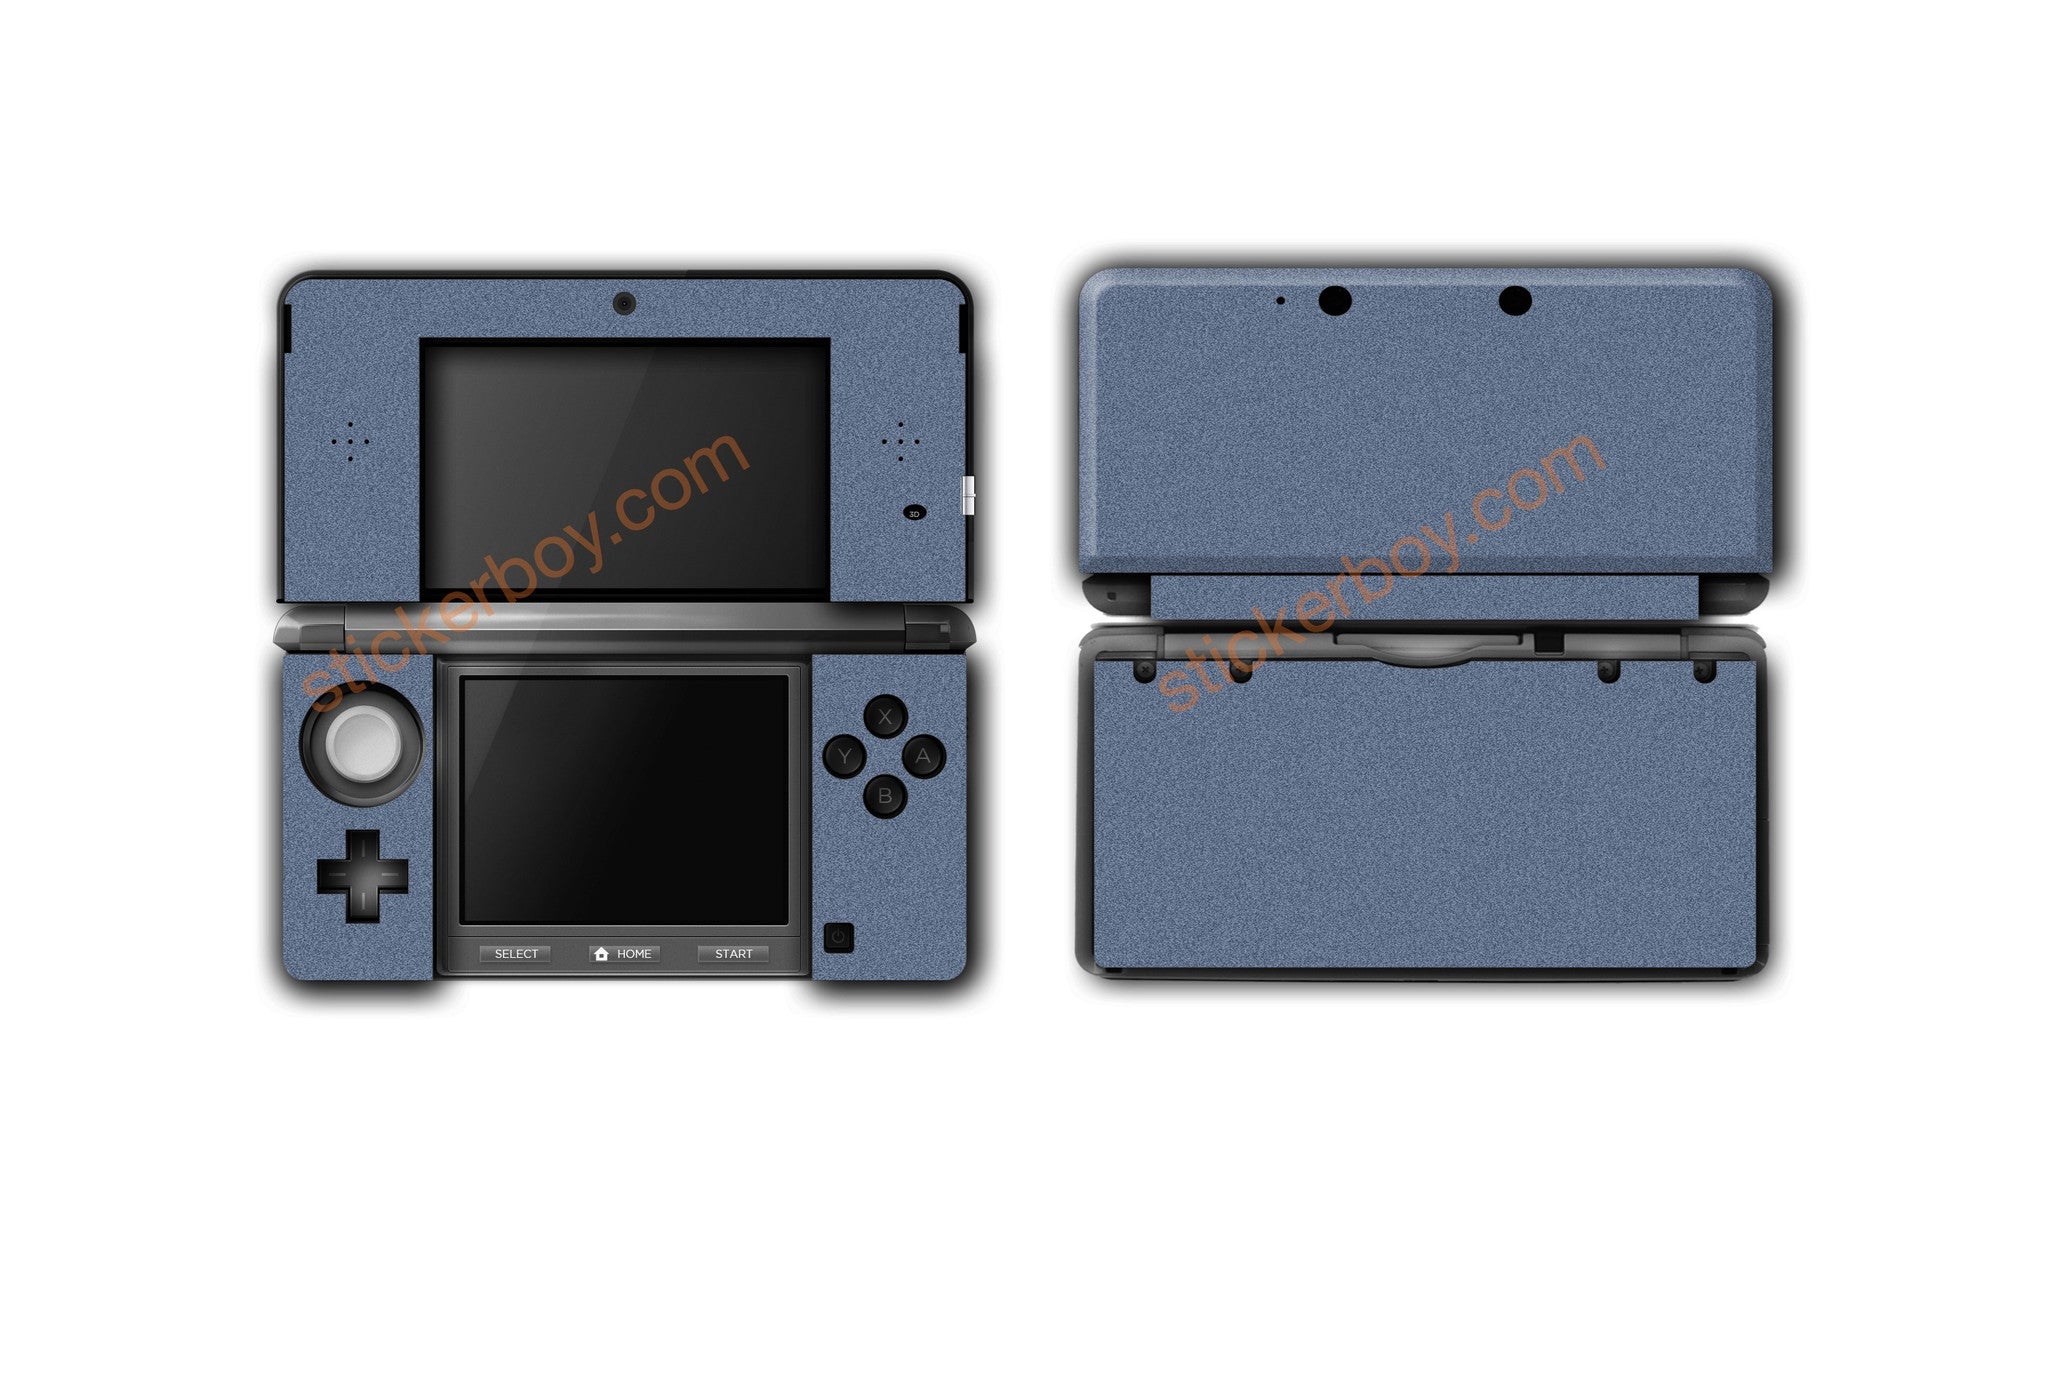 Satin Blue Myst - 3DS Skins | Stickerboy Skins for protecting mobile device